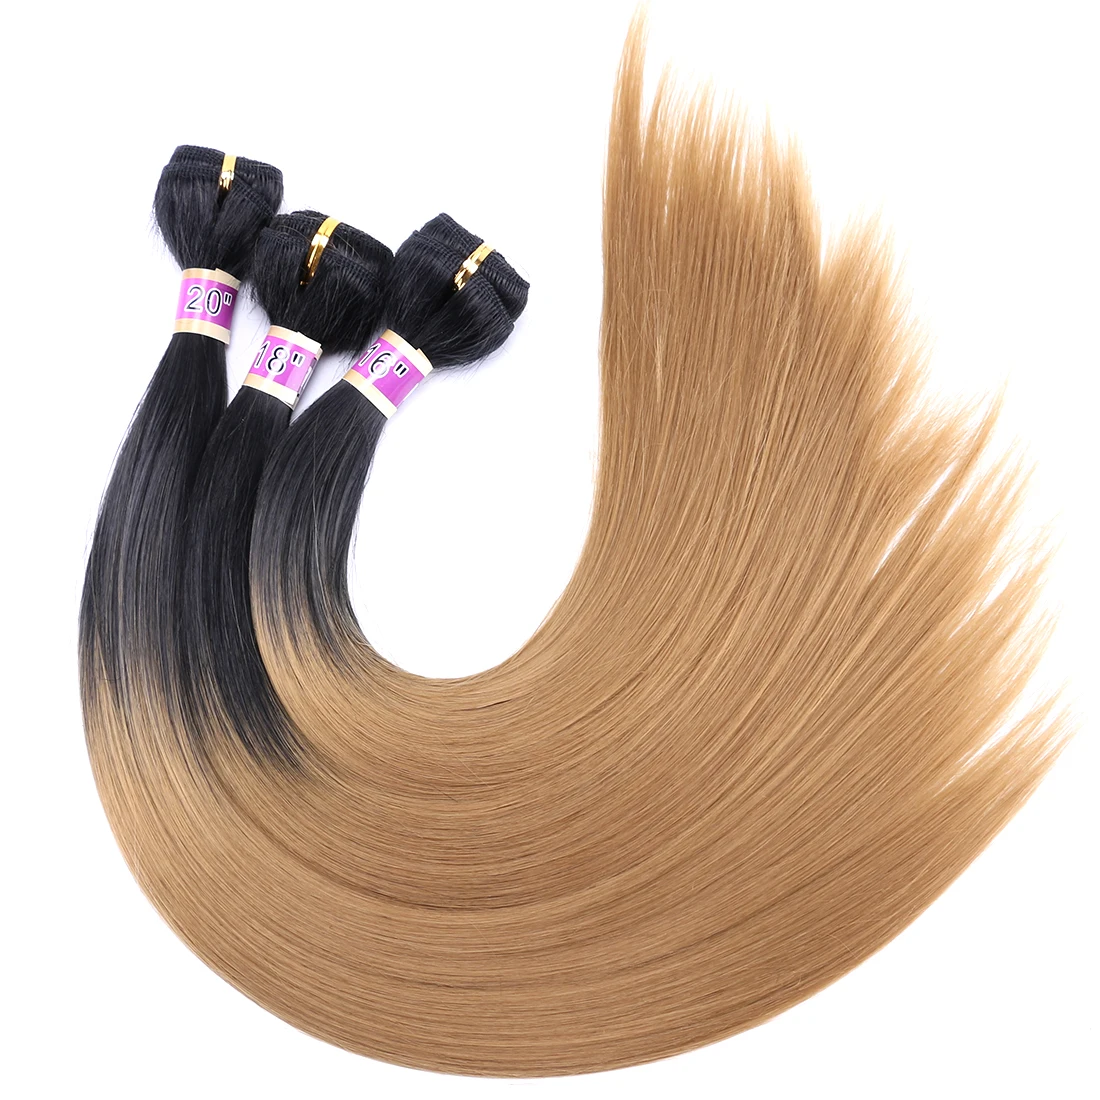 

Ombre Golden Silky Straight Synthetic Long straight Fiber Hair Bundles Color Golden Cosplay Hair Extension for black women